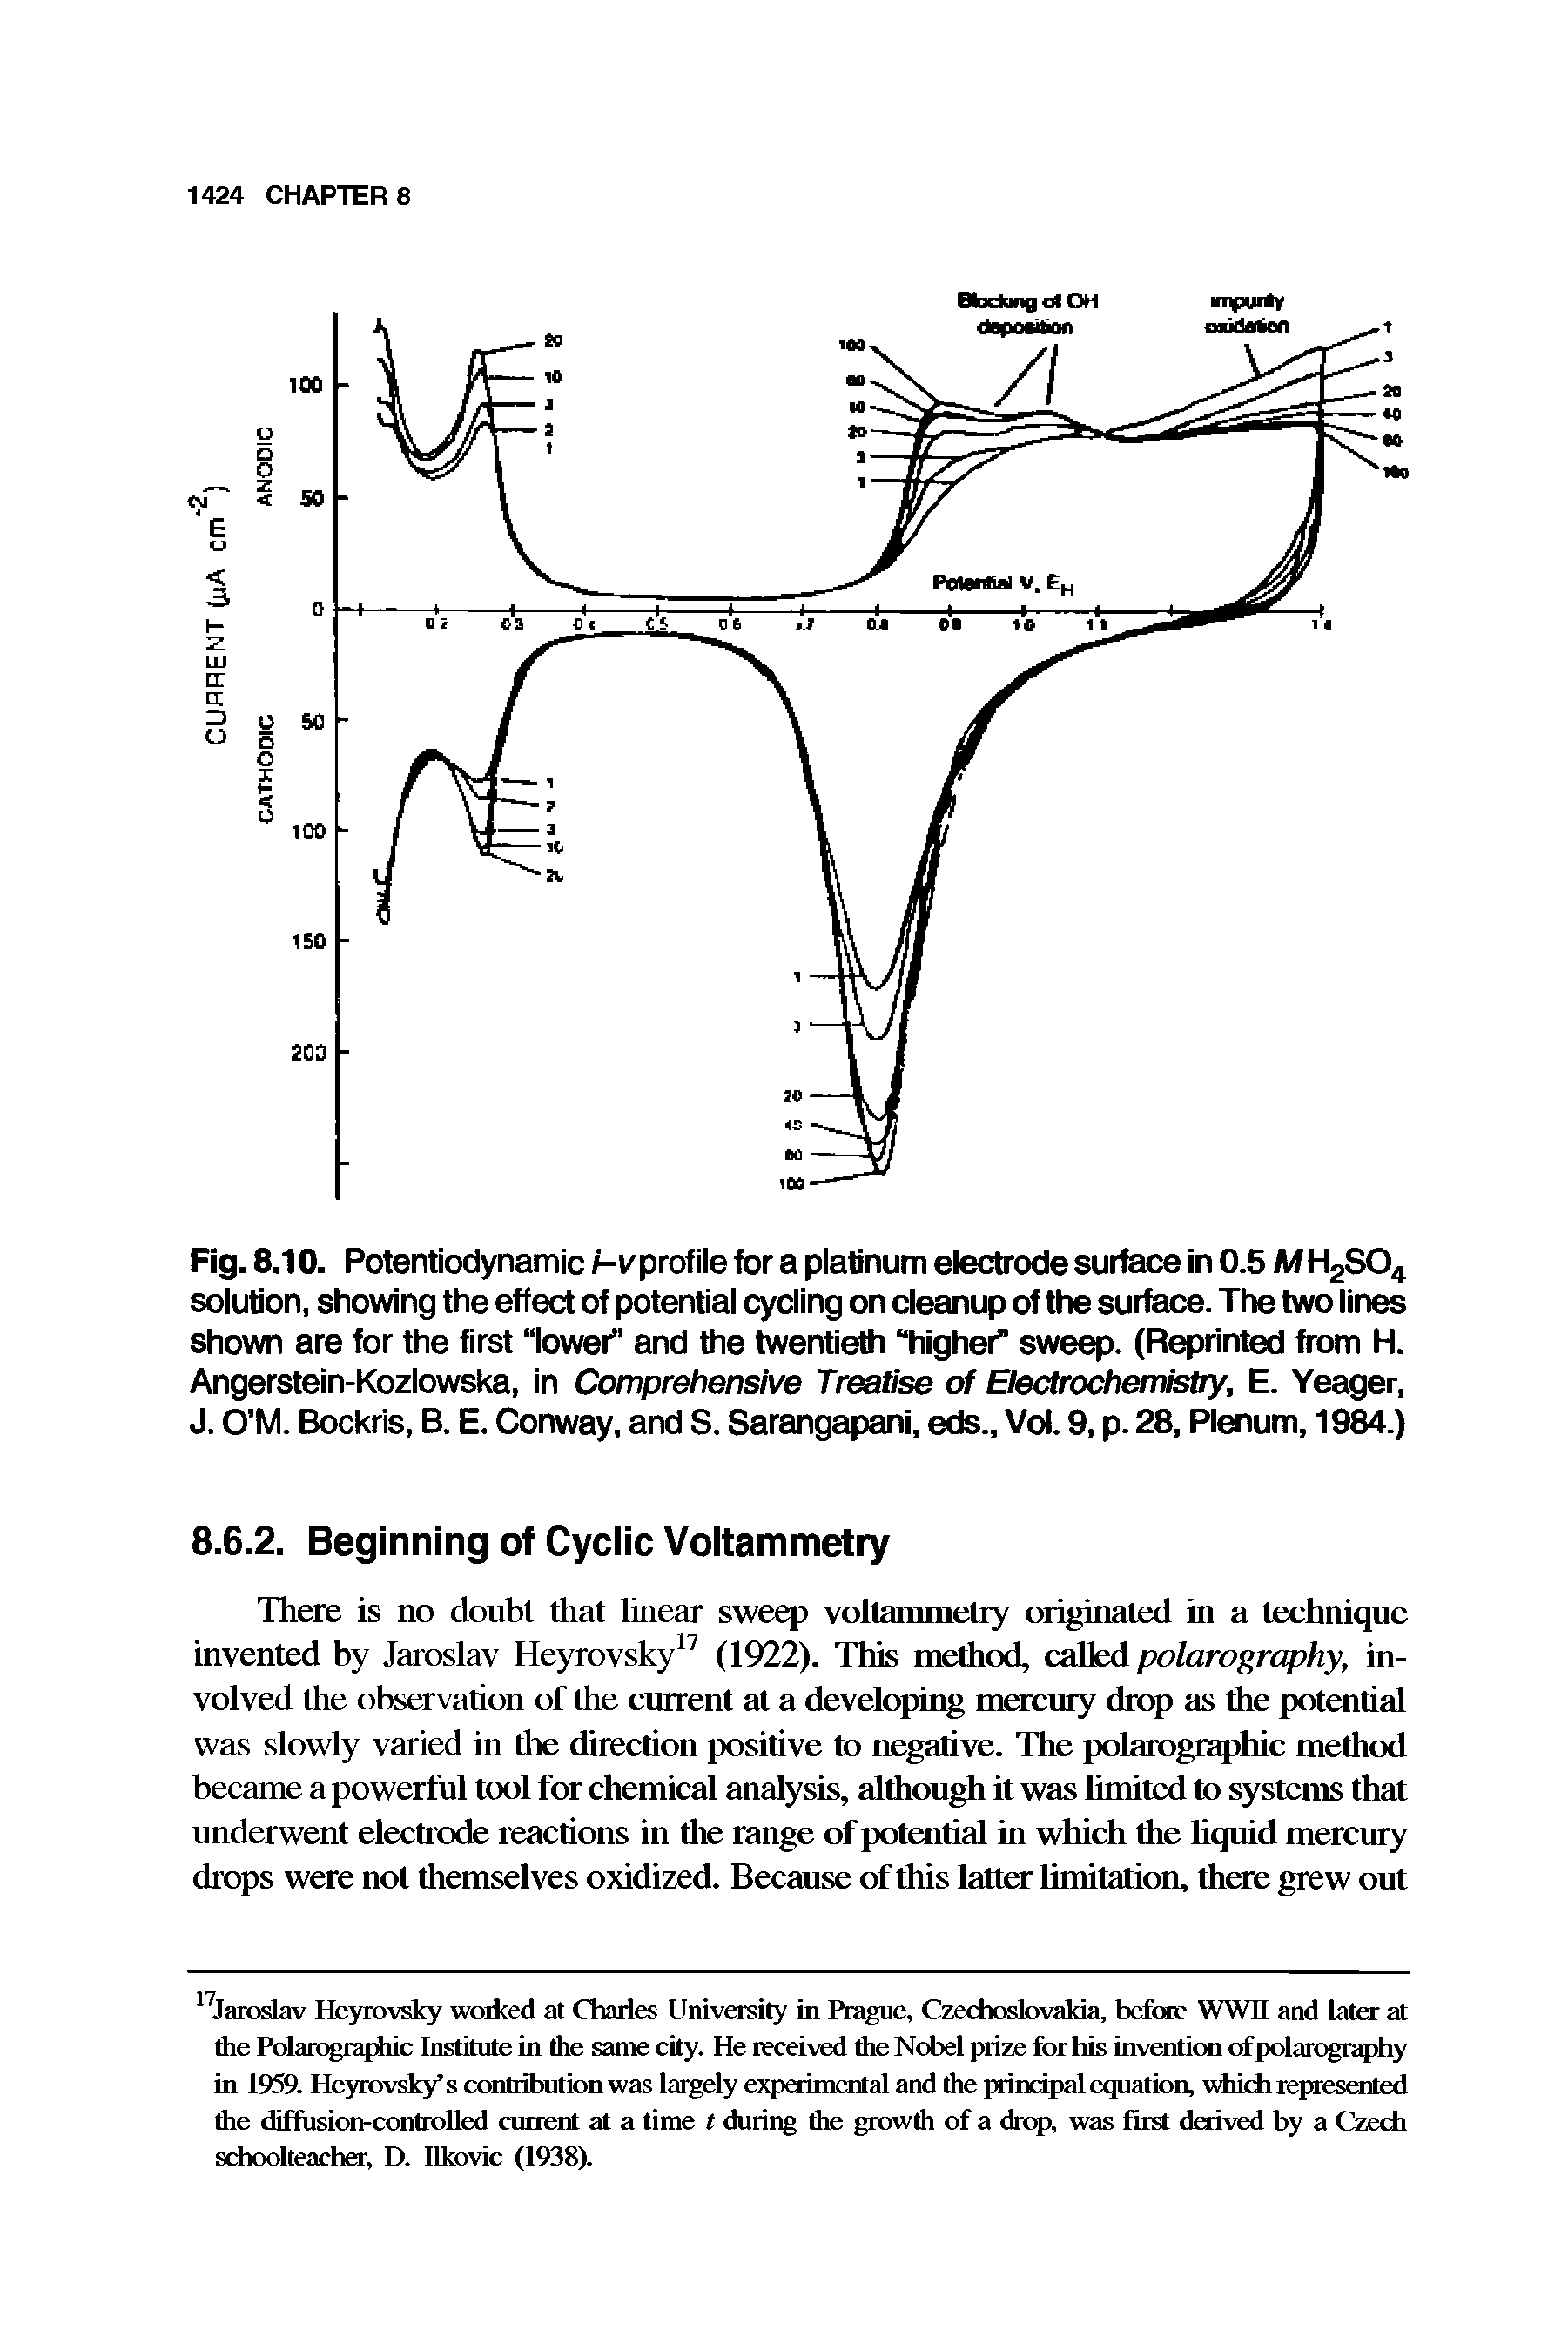 Fig. 8.10. Potentiodynamic i-v profile for a platinum electrode surface in 0.5 M H2S04 solution, showing the effect of potential cycling on cleanup of the surface. The two lines shown are for the first lower" and the twentieth higher sweep. (Reprinted from H. Angerstein-Kozlowska, in Comprehensive Treatise of Electrochemistry, E. Yeager, J. O M. Bockris, B. E. Conway, and S. Sarangapani, eds., Vol. 9, p. 28, Plenum, 1984.)...